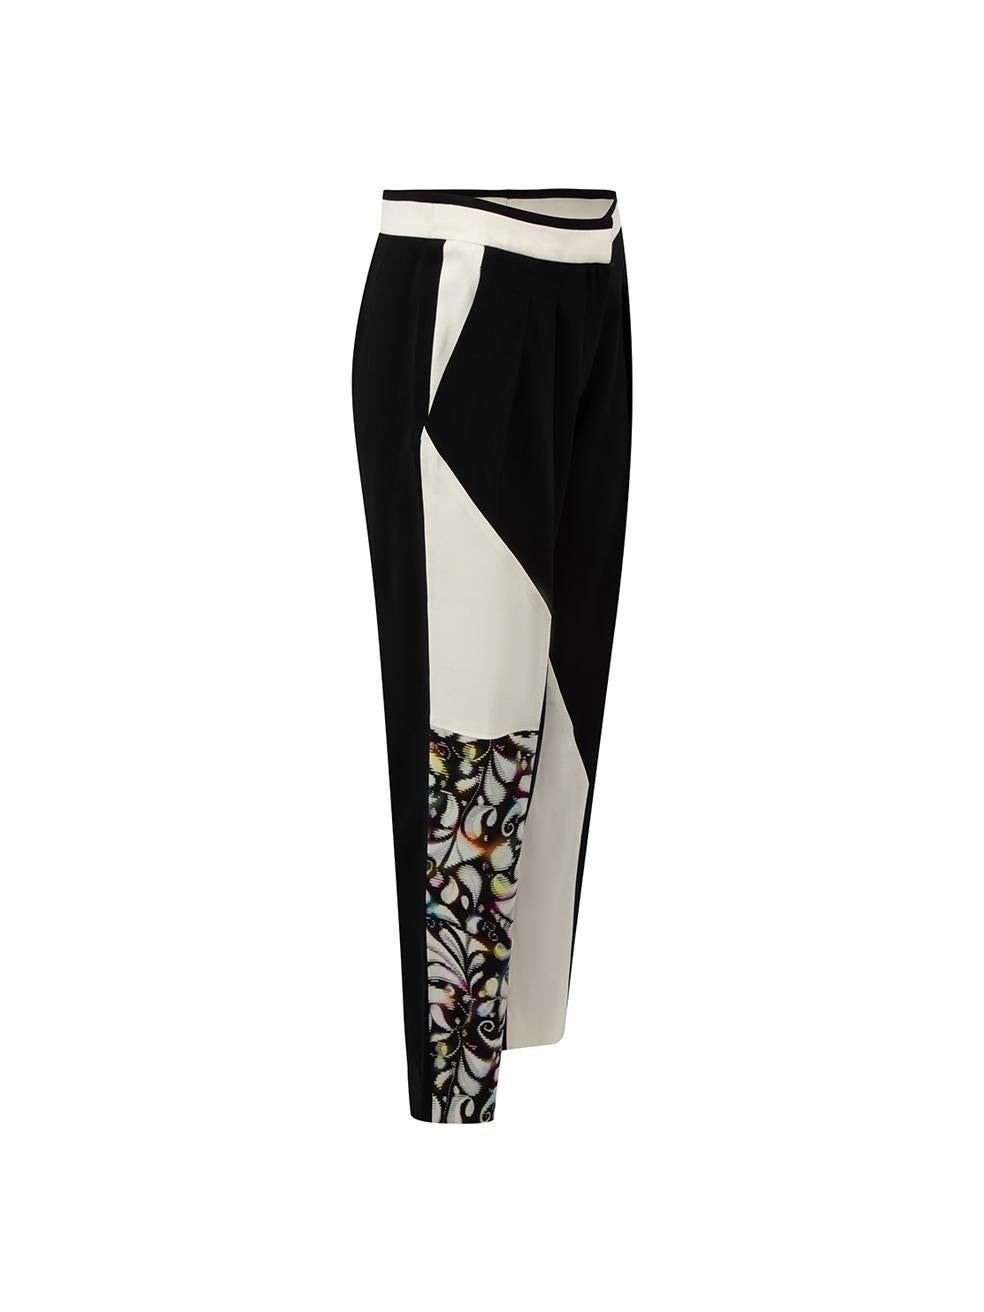 CONDITION is Good. General wear to trousers is evident. Moderate signs of wear to fabric with darker thread runs and minor pilling on the white panelled sections of is used Peter Pilotto designer resale item.



Details


Black and